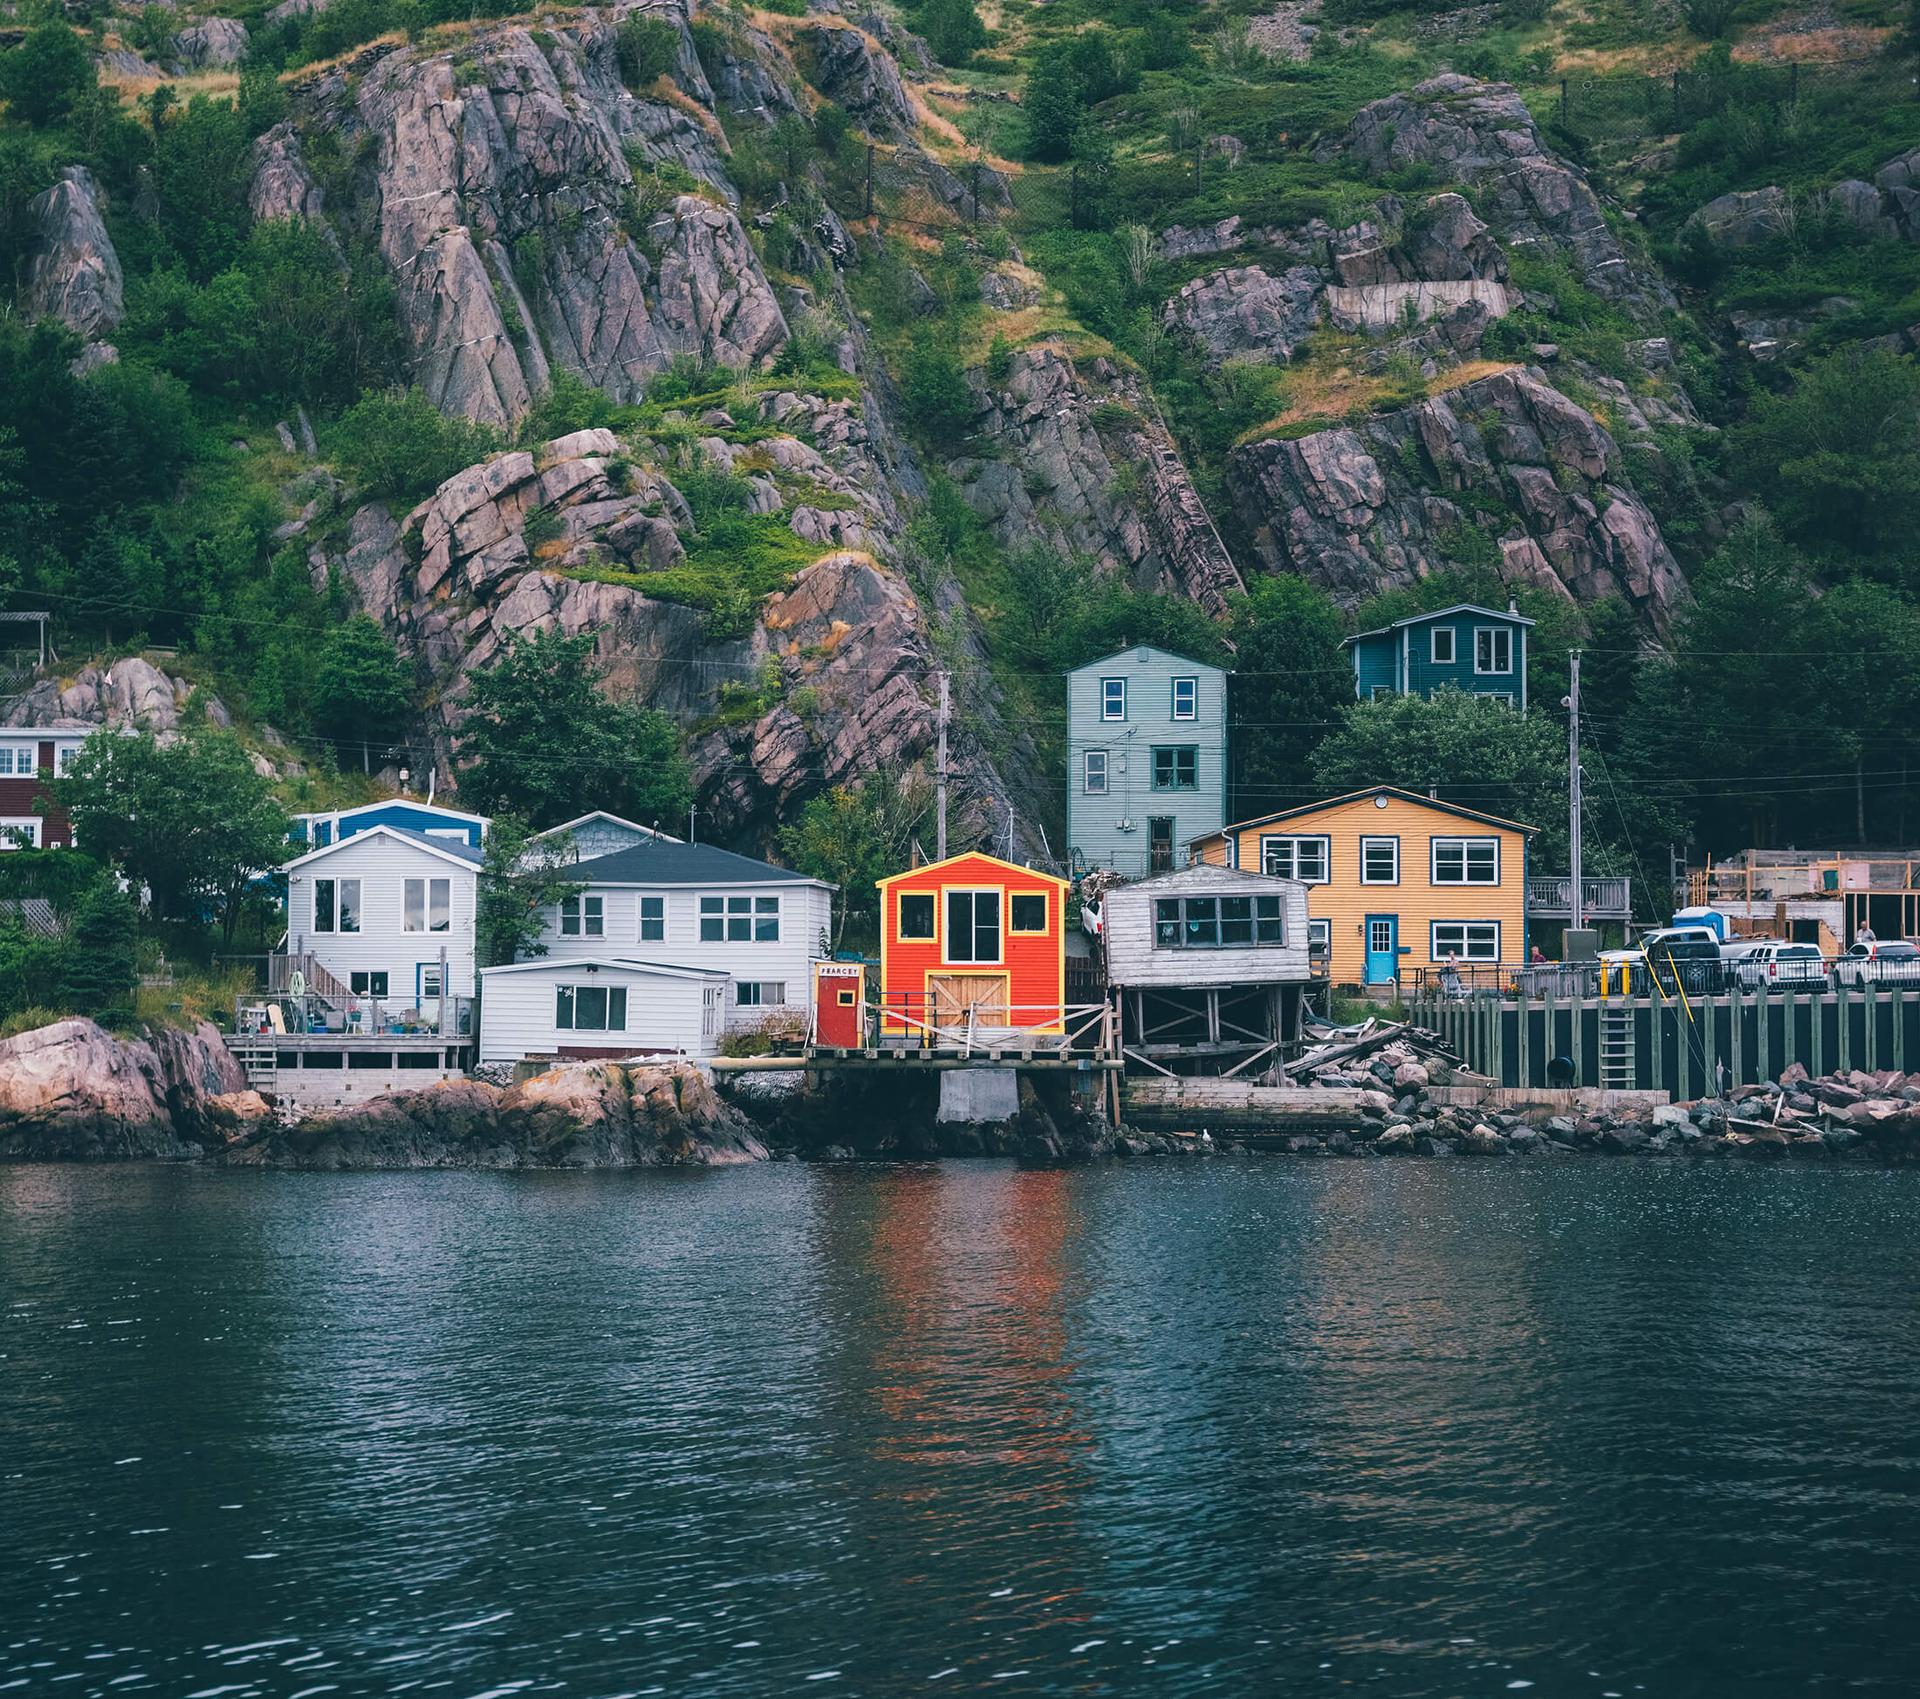 A row of colourful houses on the bay in St. John's